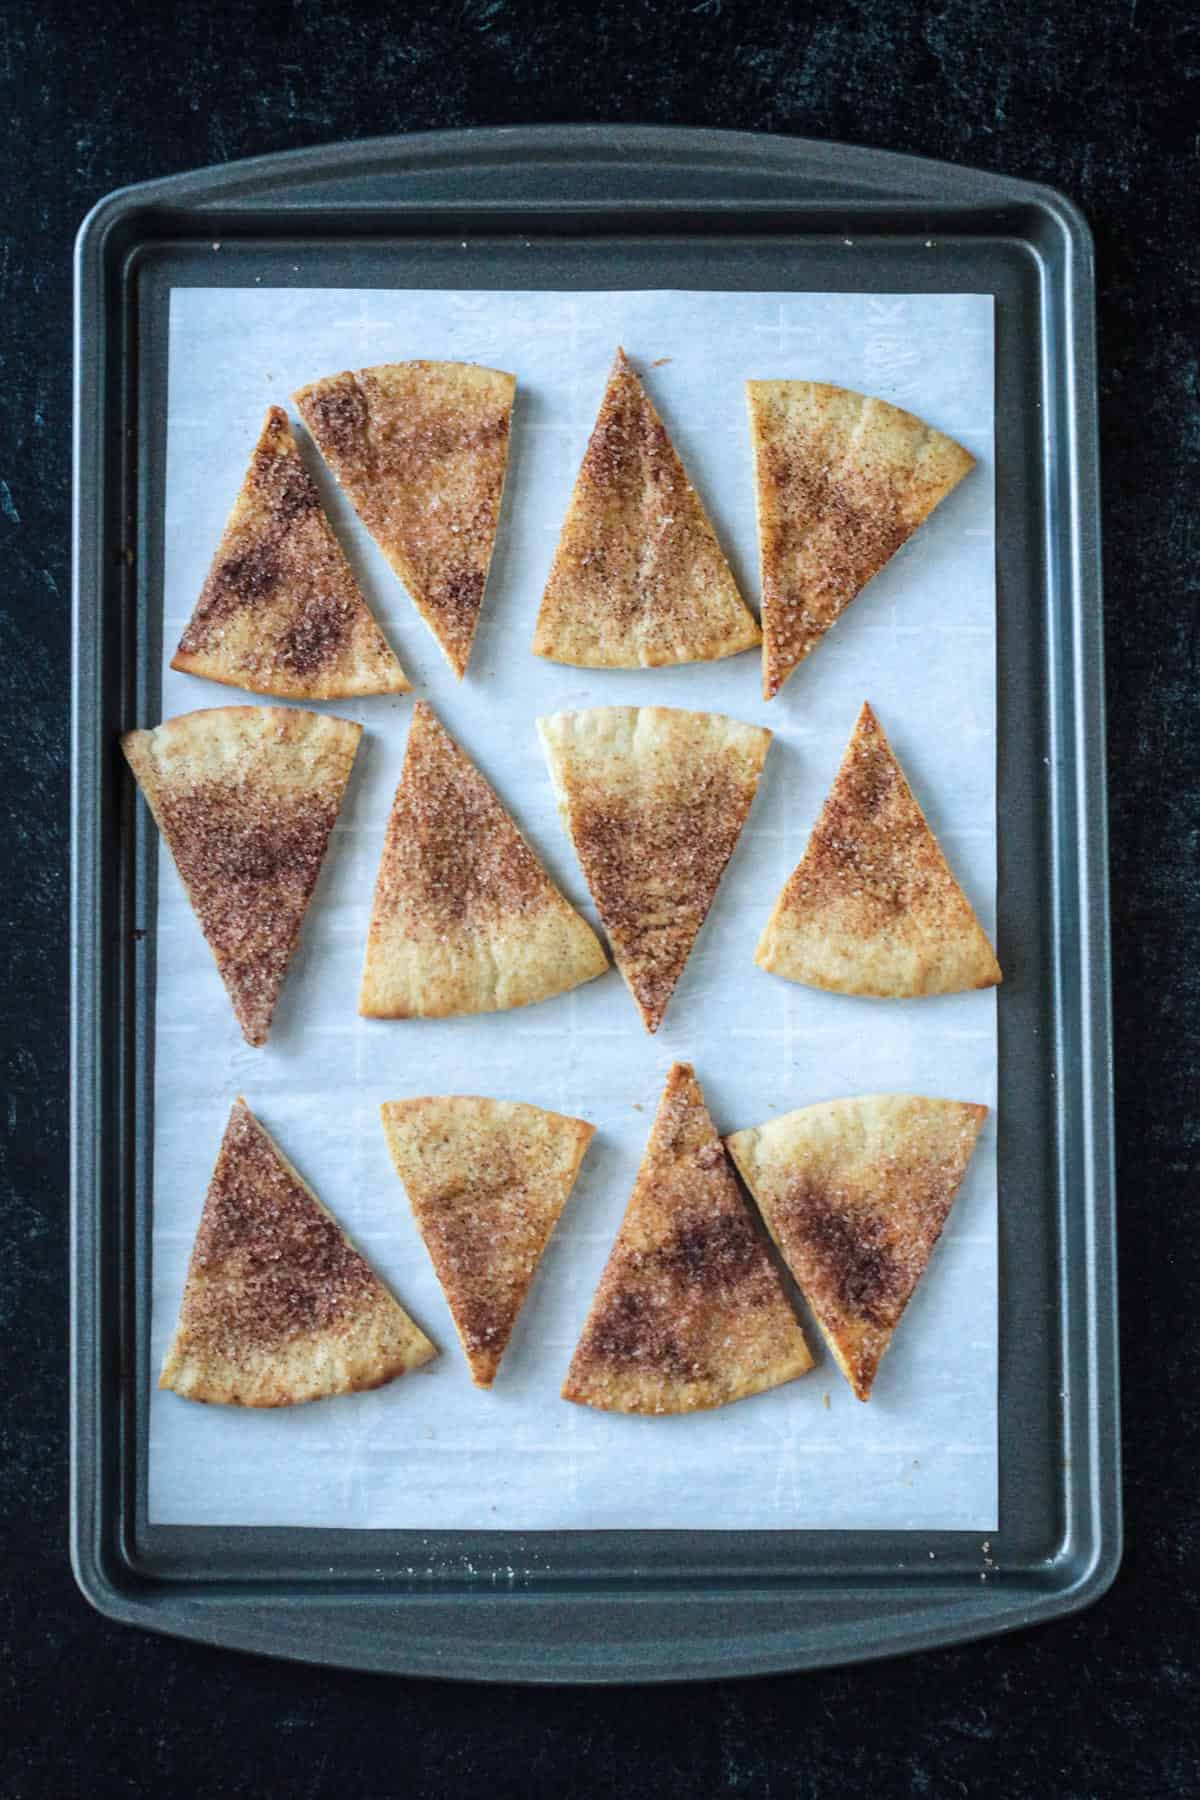 Baked chips on a baking sheet.